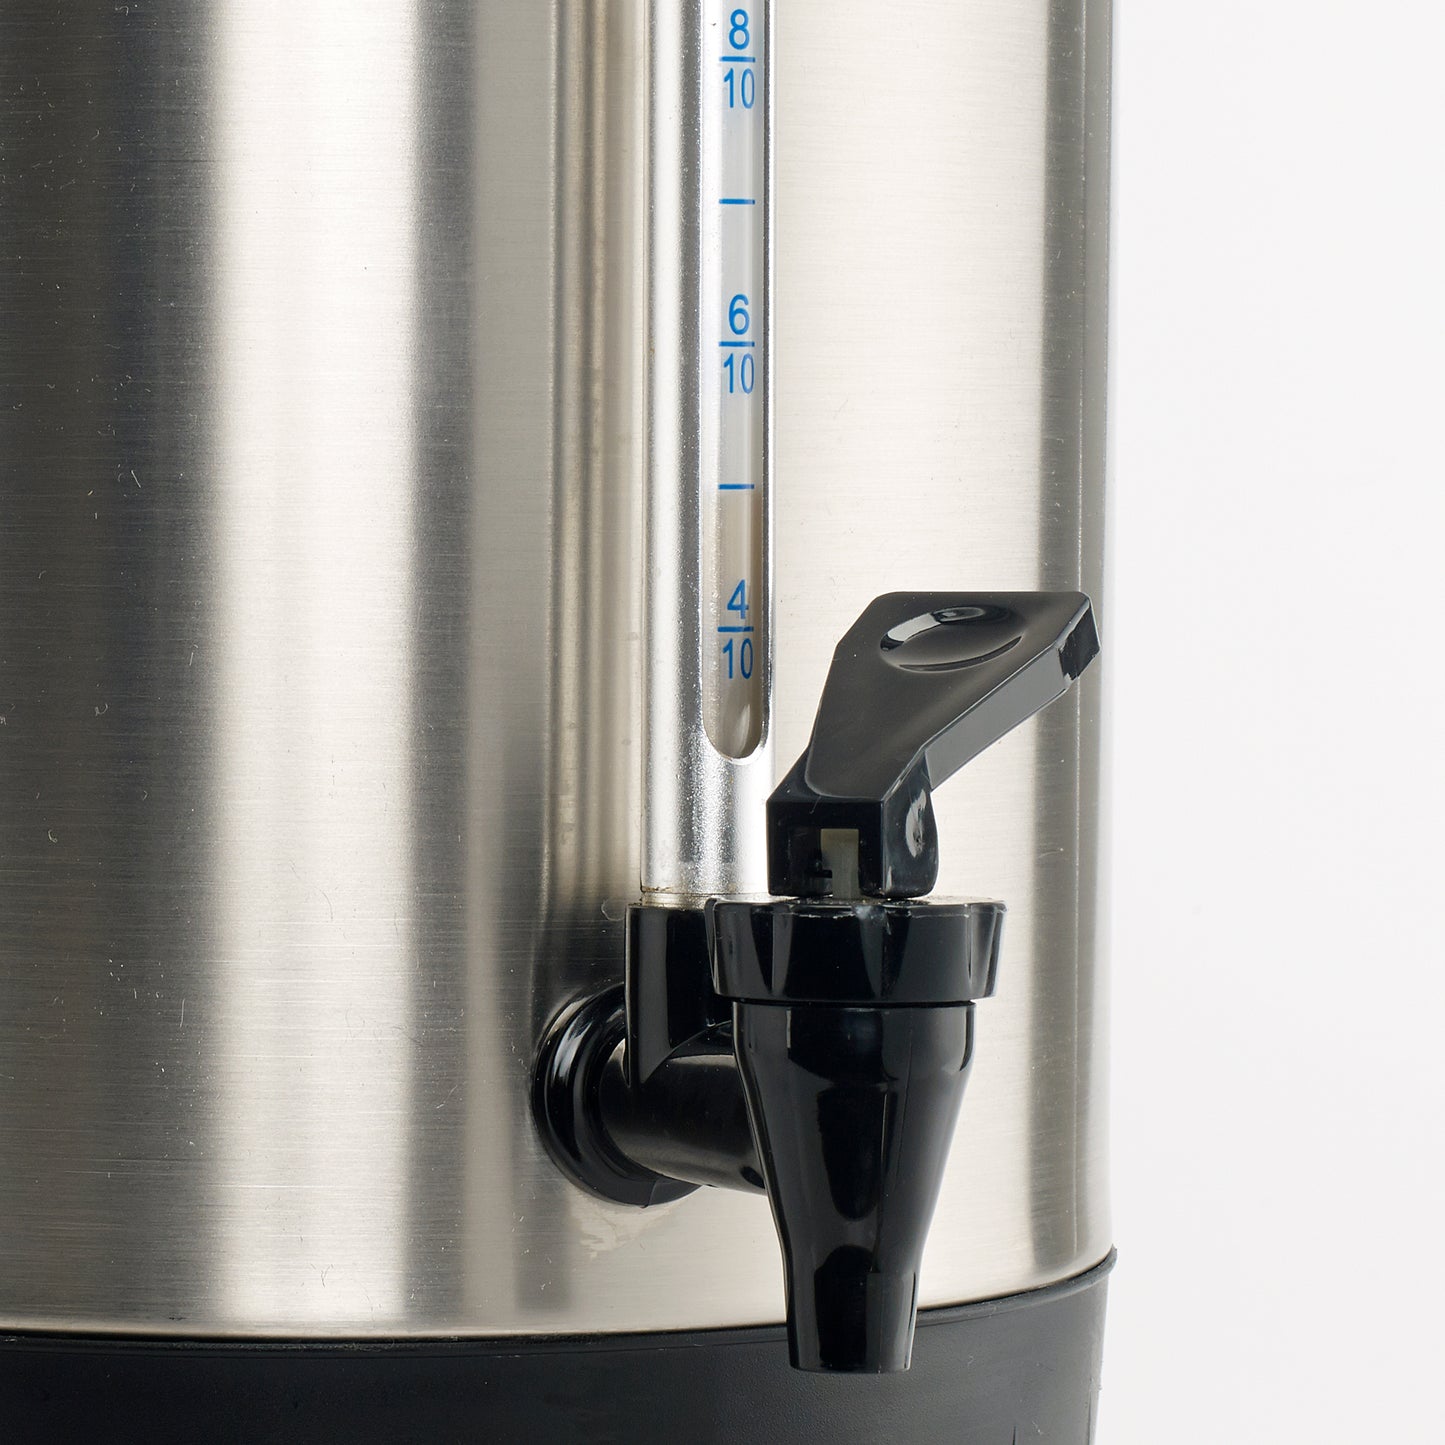 EWB-100A-I - Electric Stainless Steel Water Boiler - 4.2 Gallon (16L) International